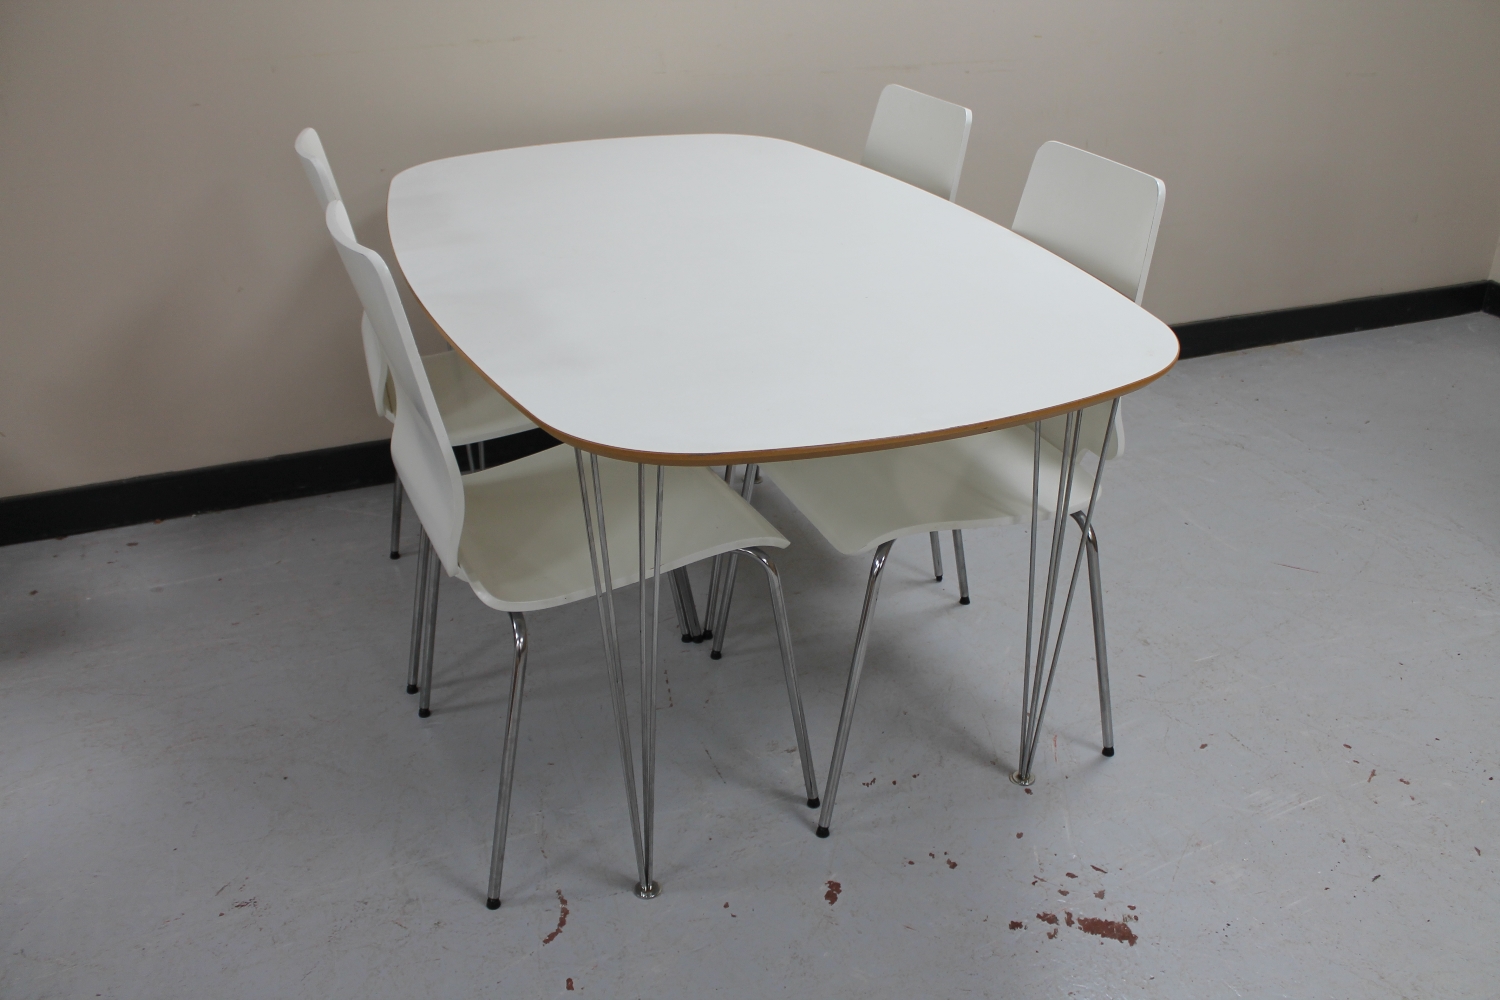 An Ikea dining table on metal hair pin legs and four dining chairs